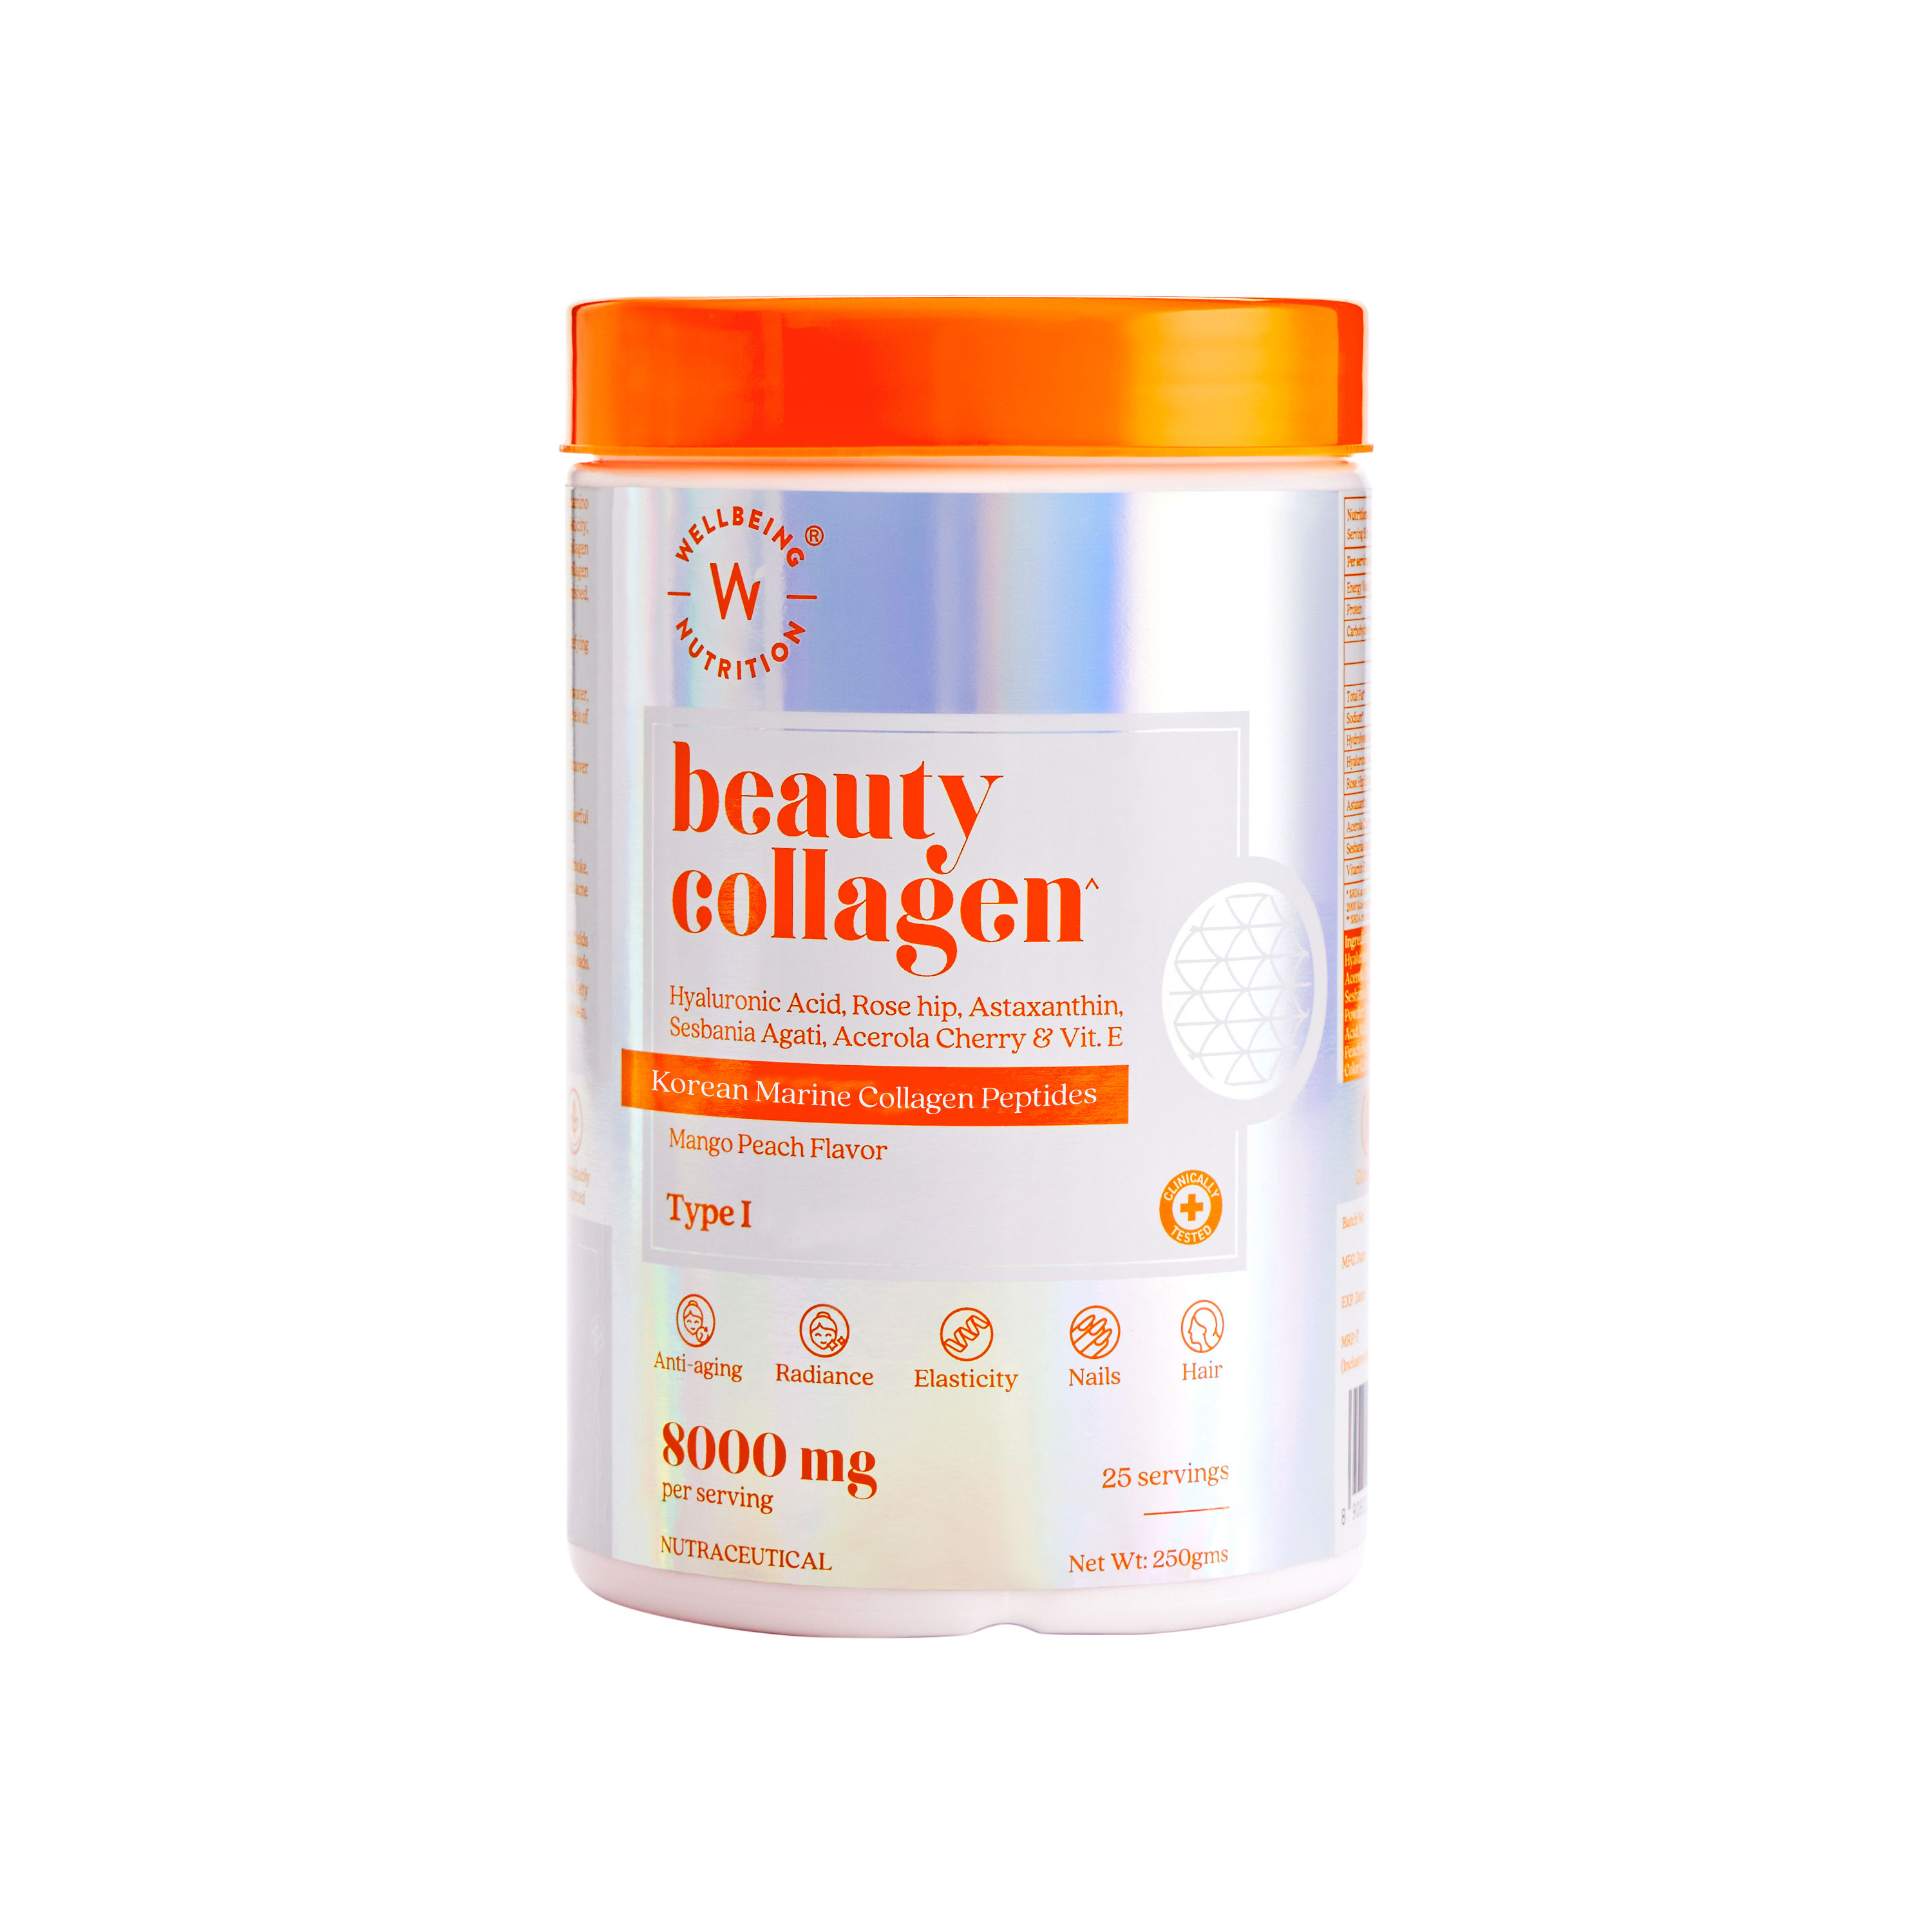 Wellbeing Nutrition Beauty Japanese Marine Collagen With Biotin, HLA For Hair, Skin & Nails